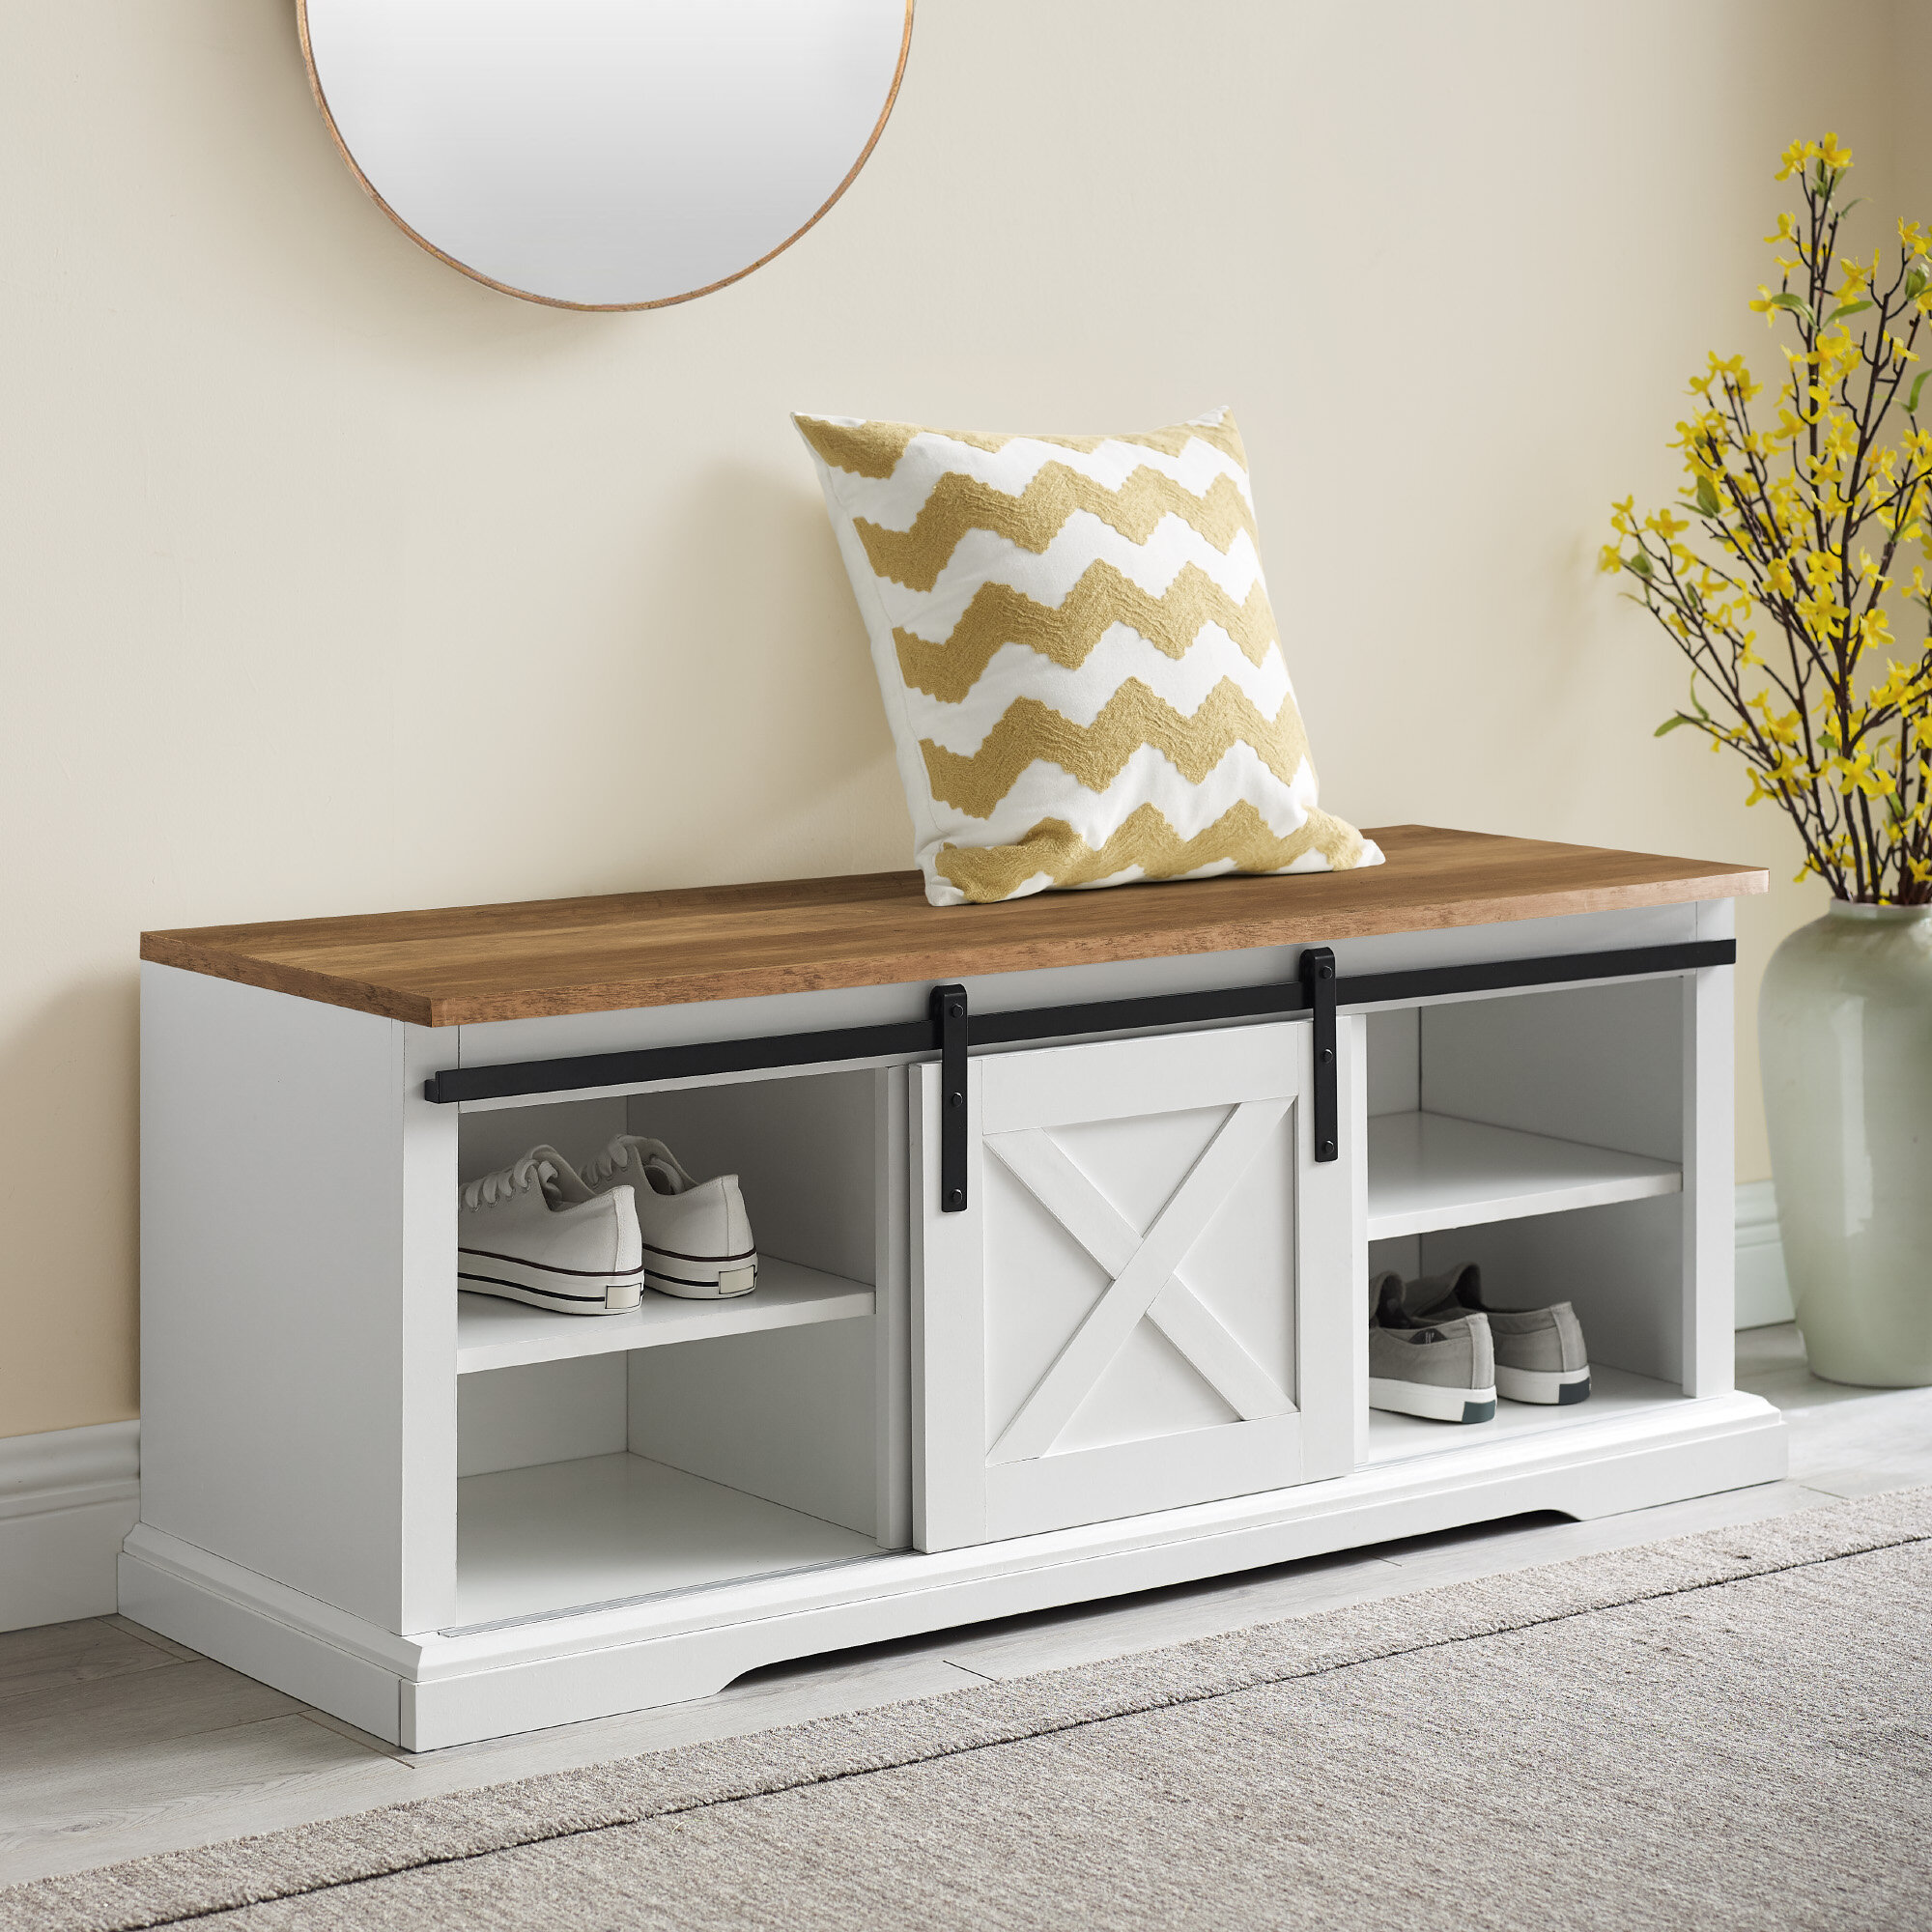 Country Farmhouse Storage Benches You Ll Love In 2021 Wayfair